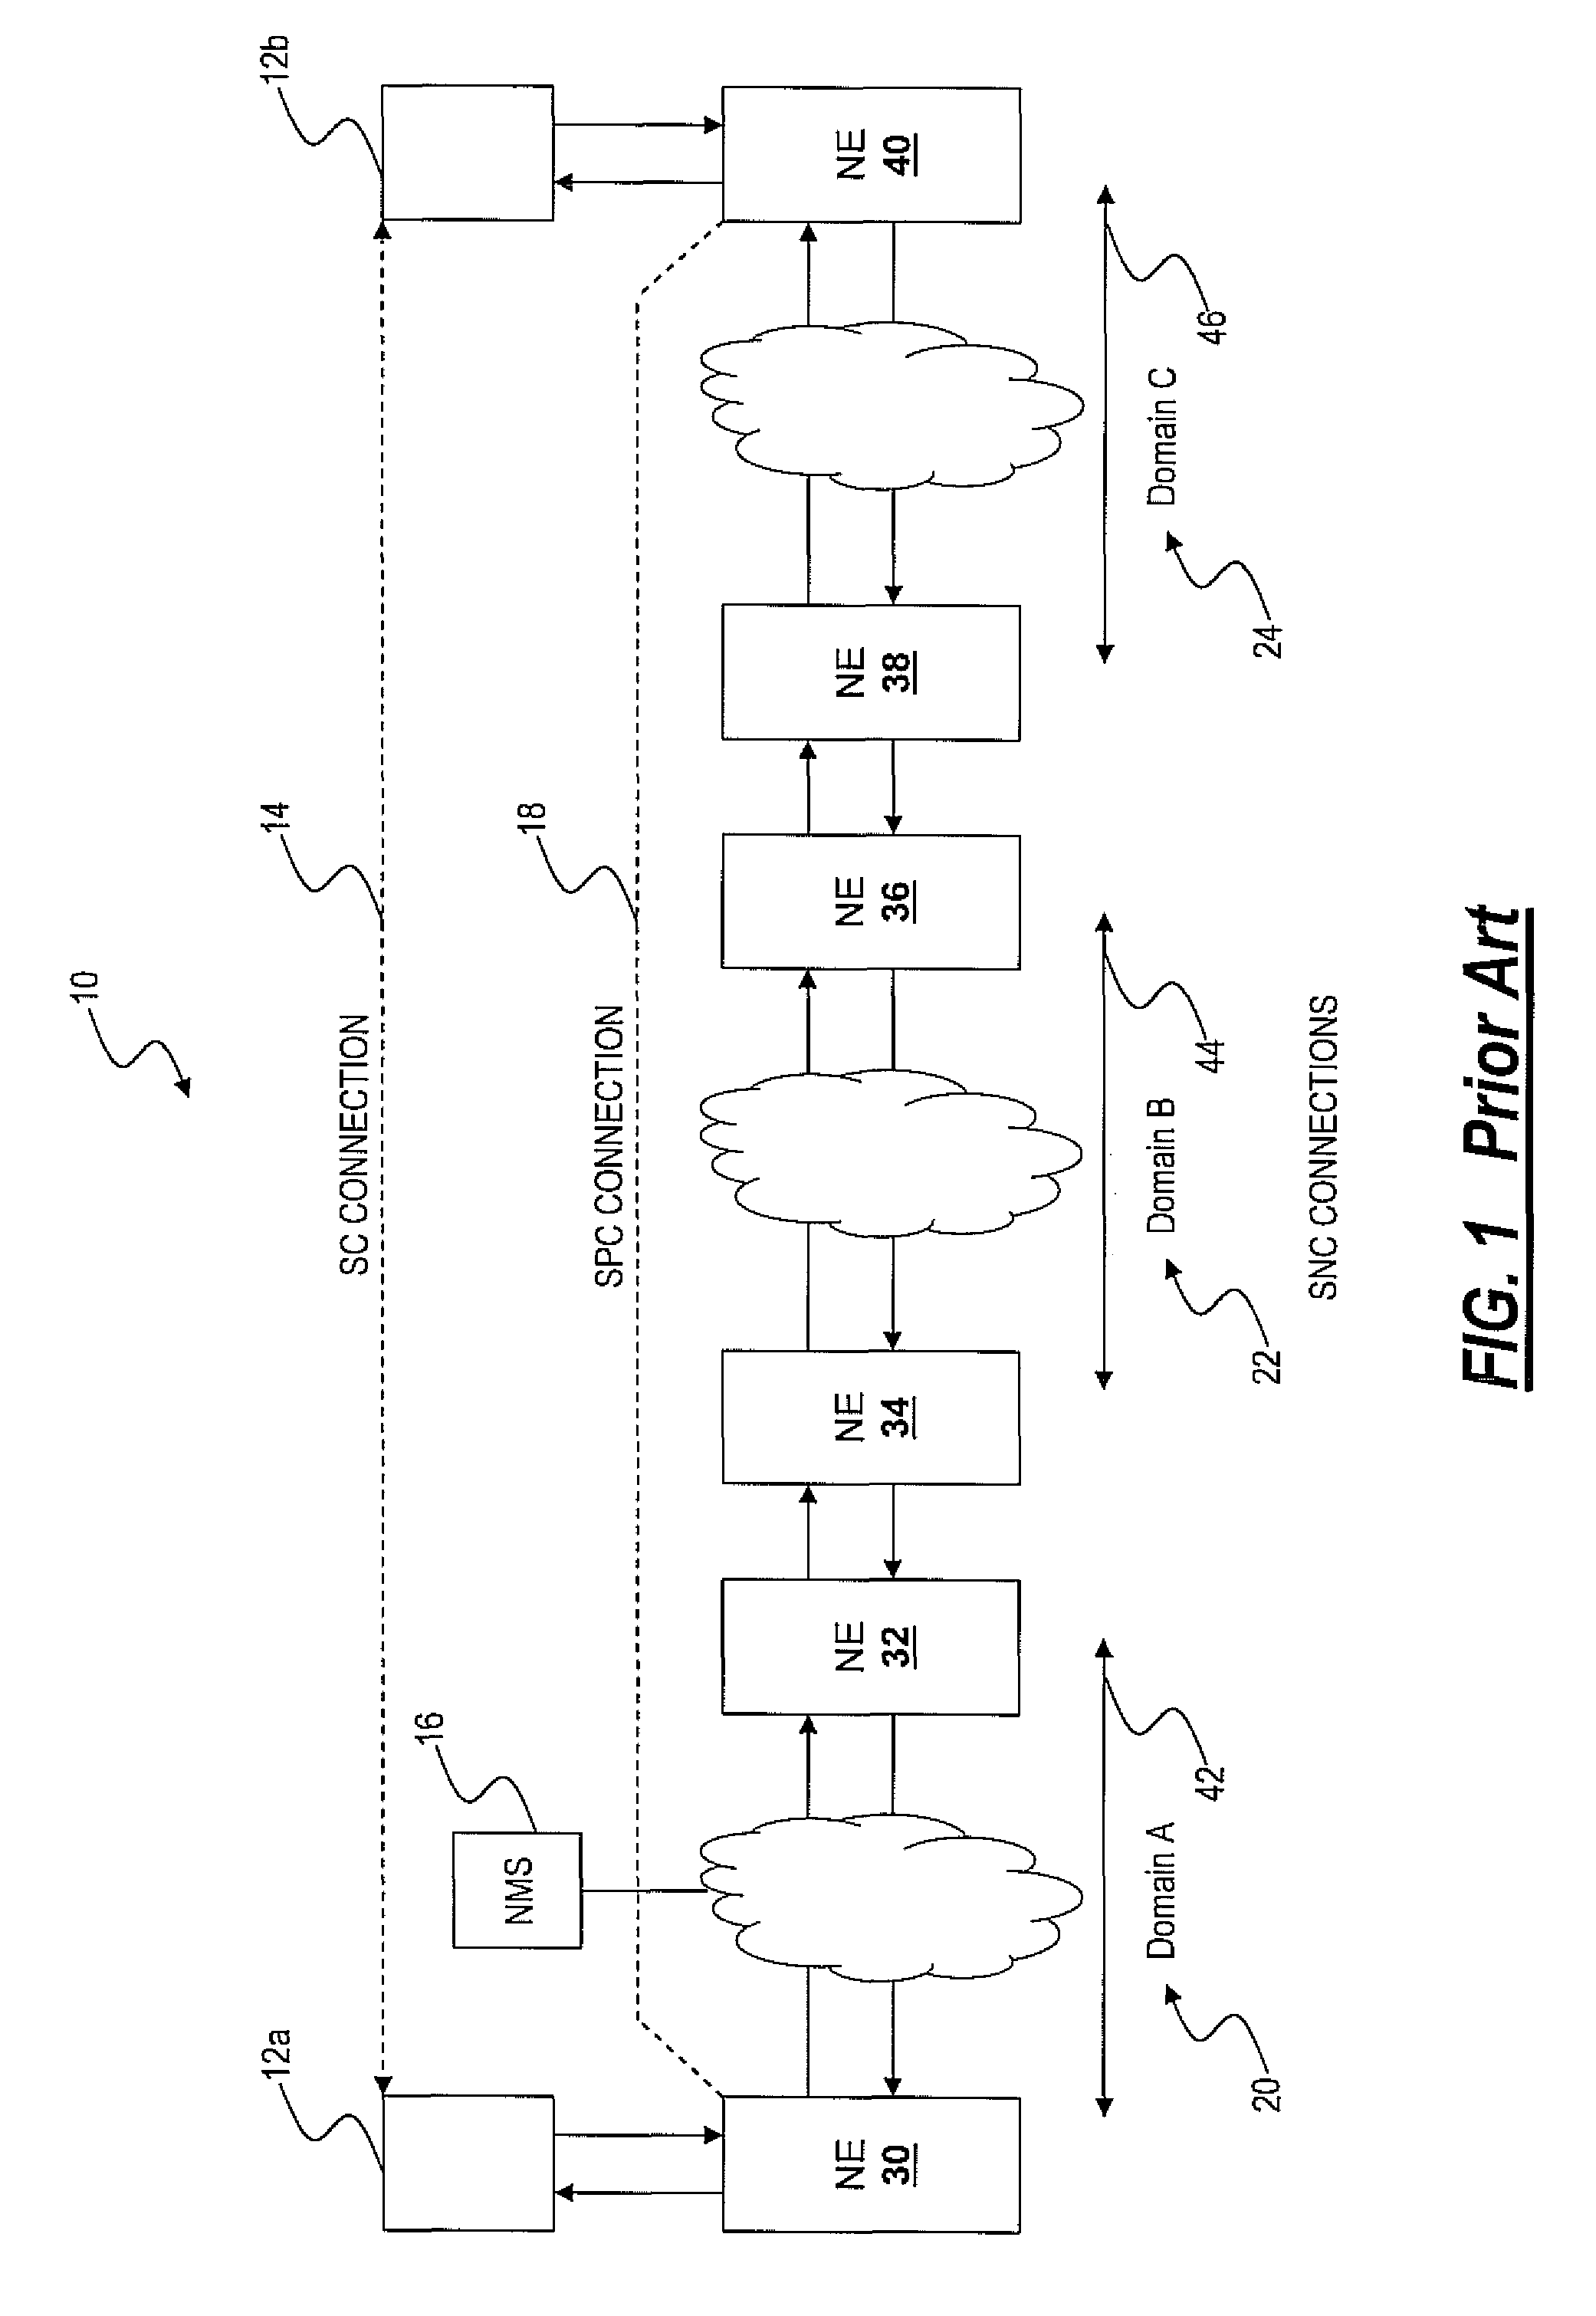 Methods and systems for the hierarchical mesh restoration of connections in an automatically switched optical network